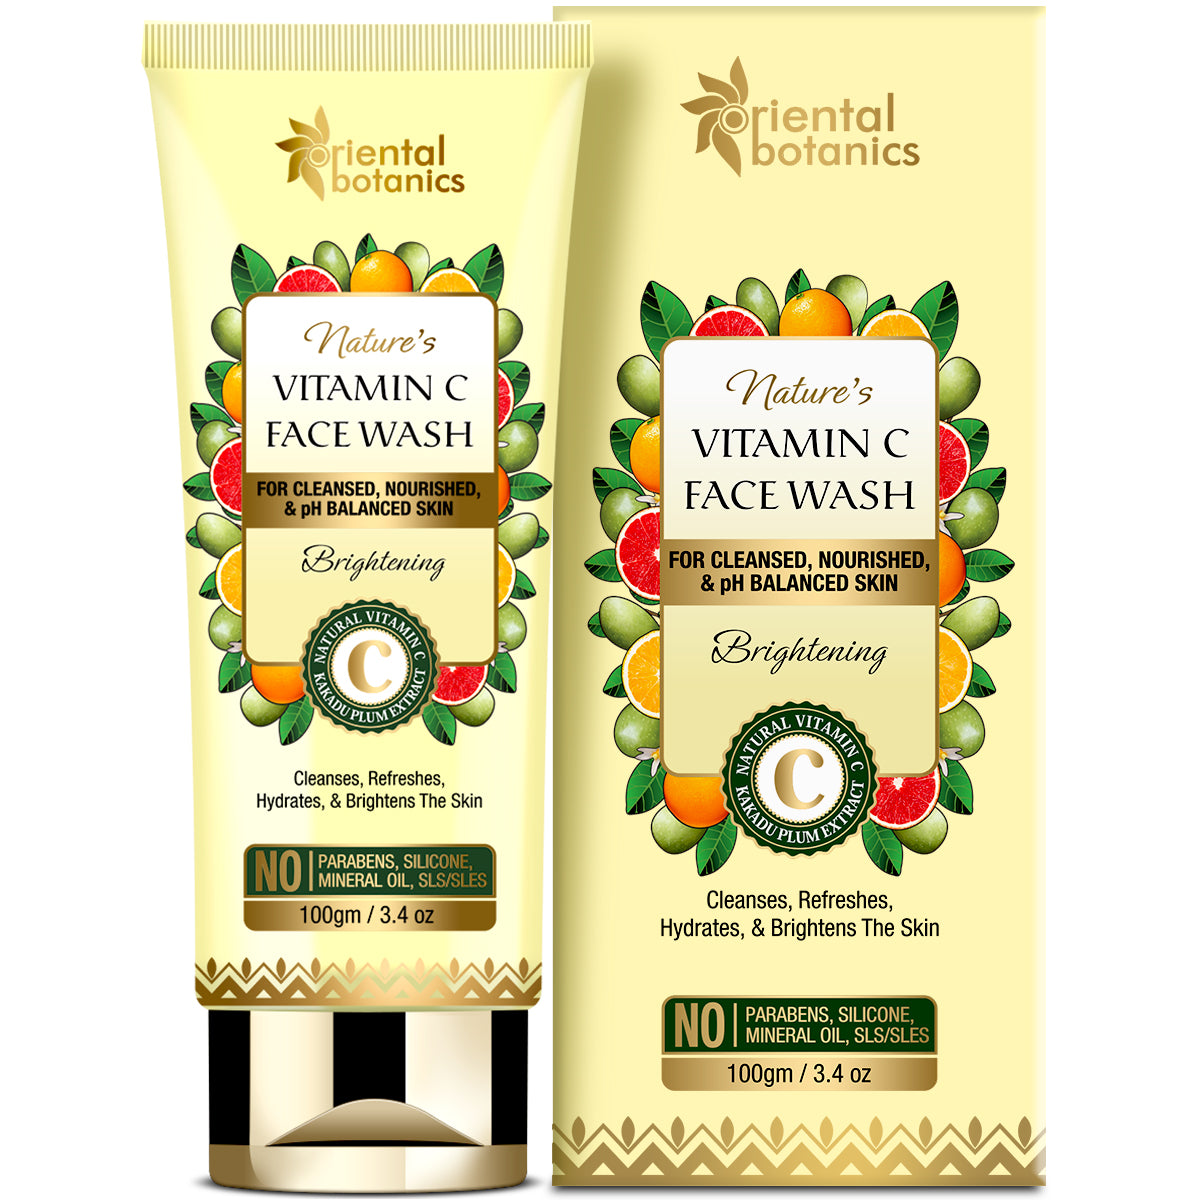 Oriental Botanics Nature's Vitamin C Brightening Face Wash - With Kakadu Plum - For Cleansed, Nourished and Ph Balanced Skin - No Parabens, Silicone, Mineral Oils, 100 g